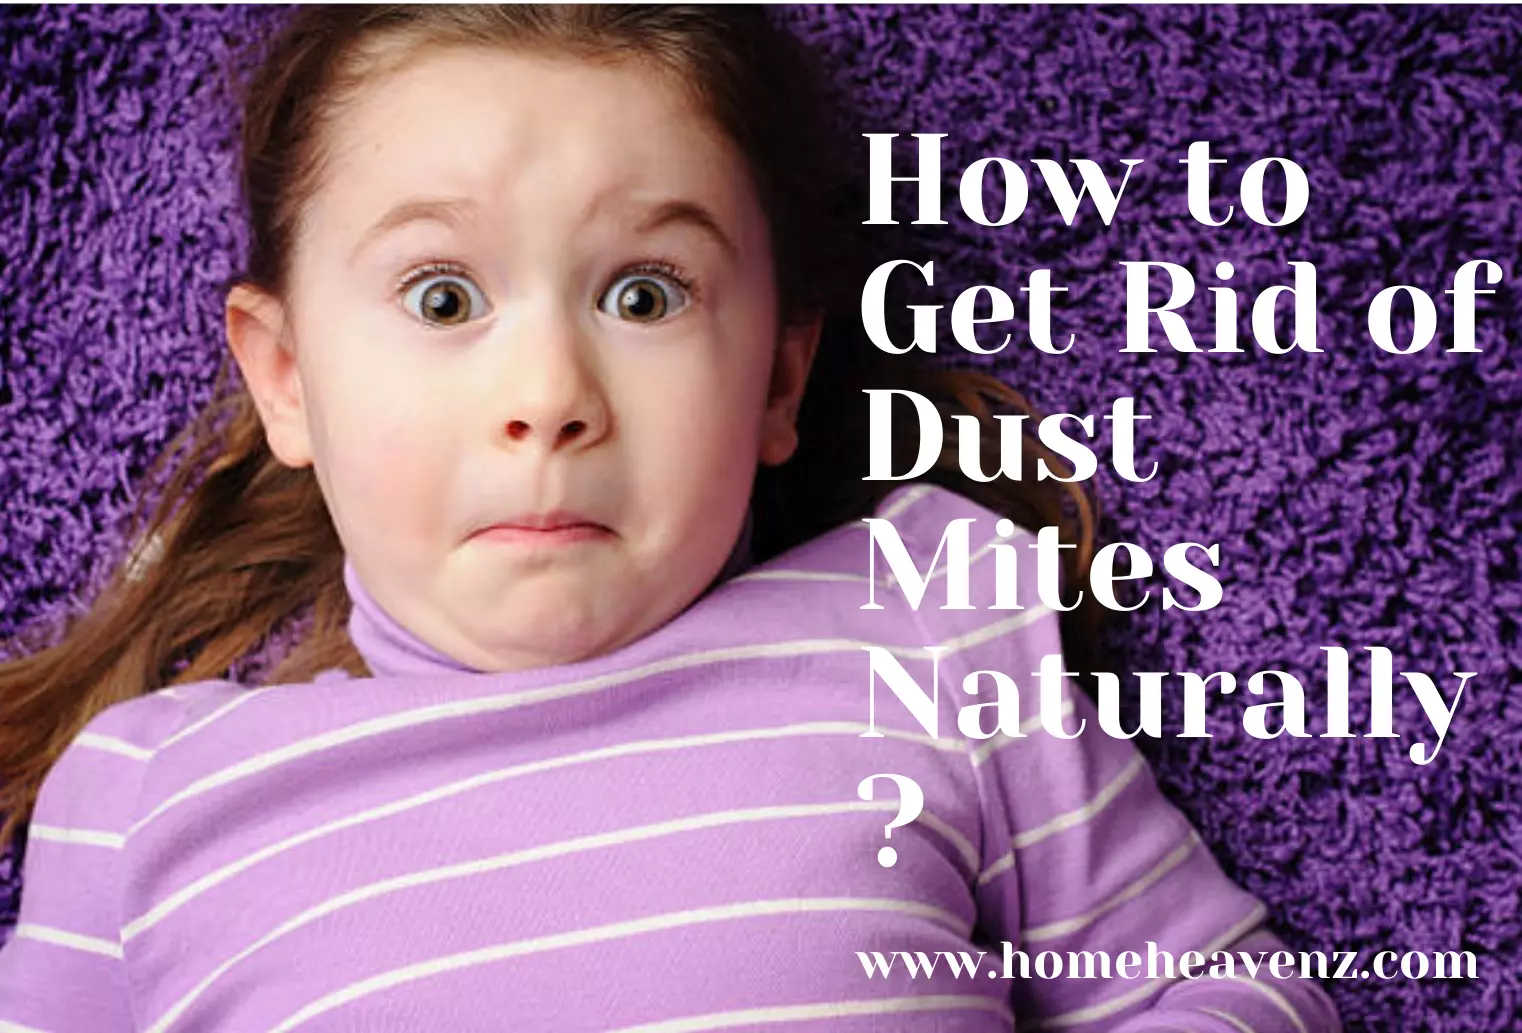 How to Get Rid of Dust Mites Naturally